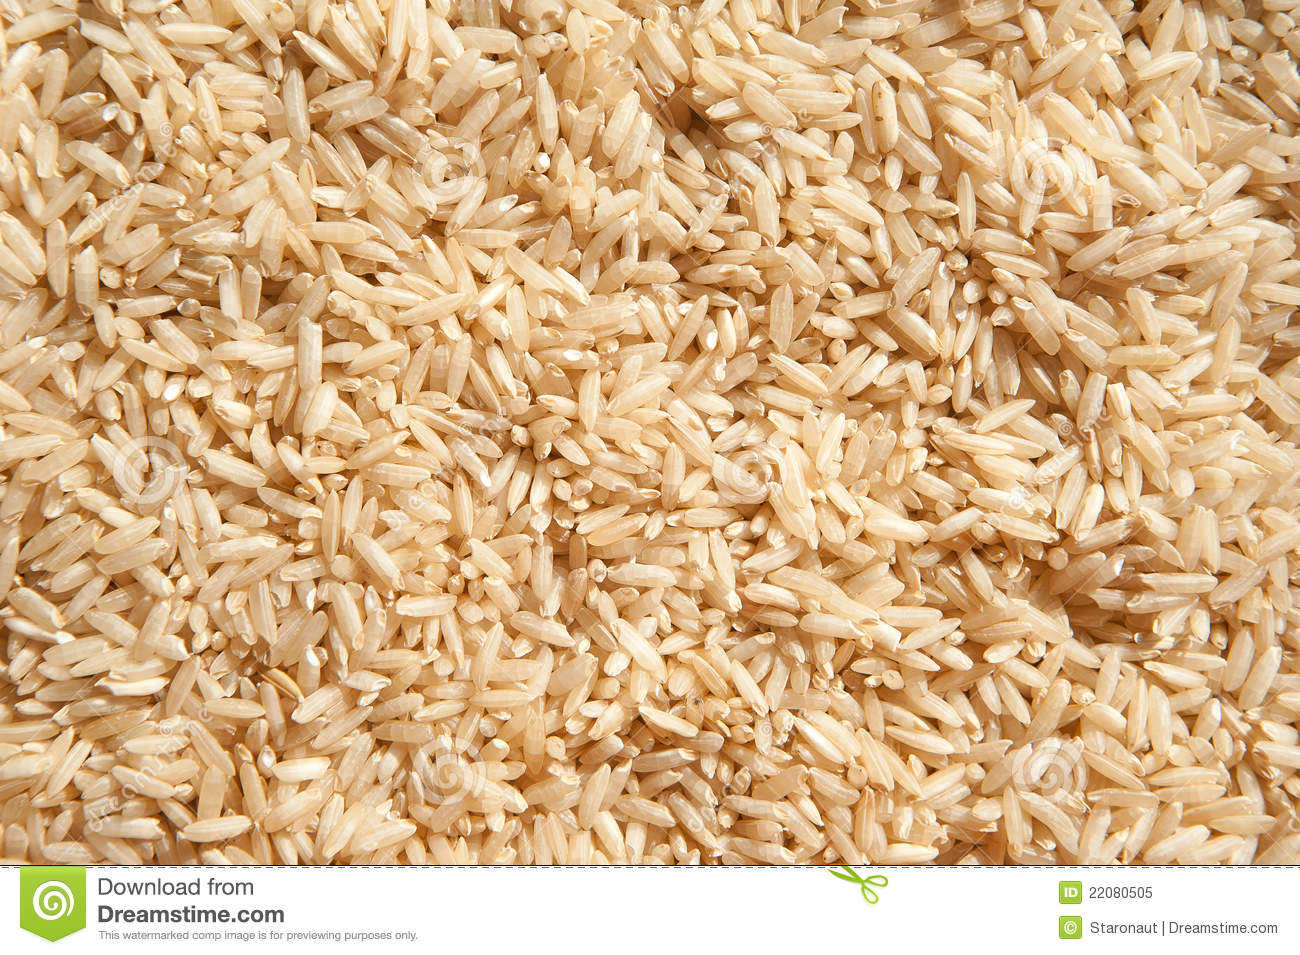 Brown Rice Texture Royalty Free Stock Photo   Image  22080505